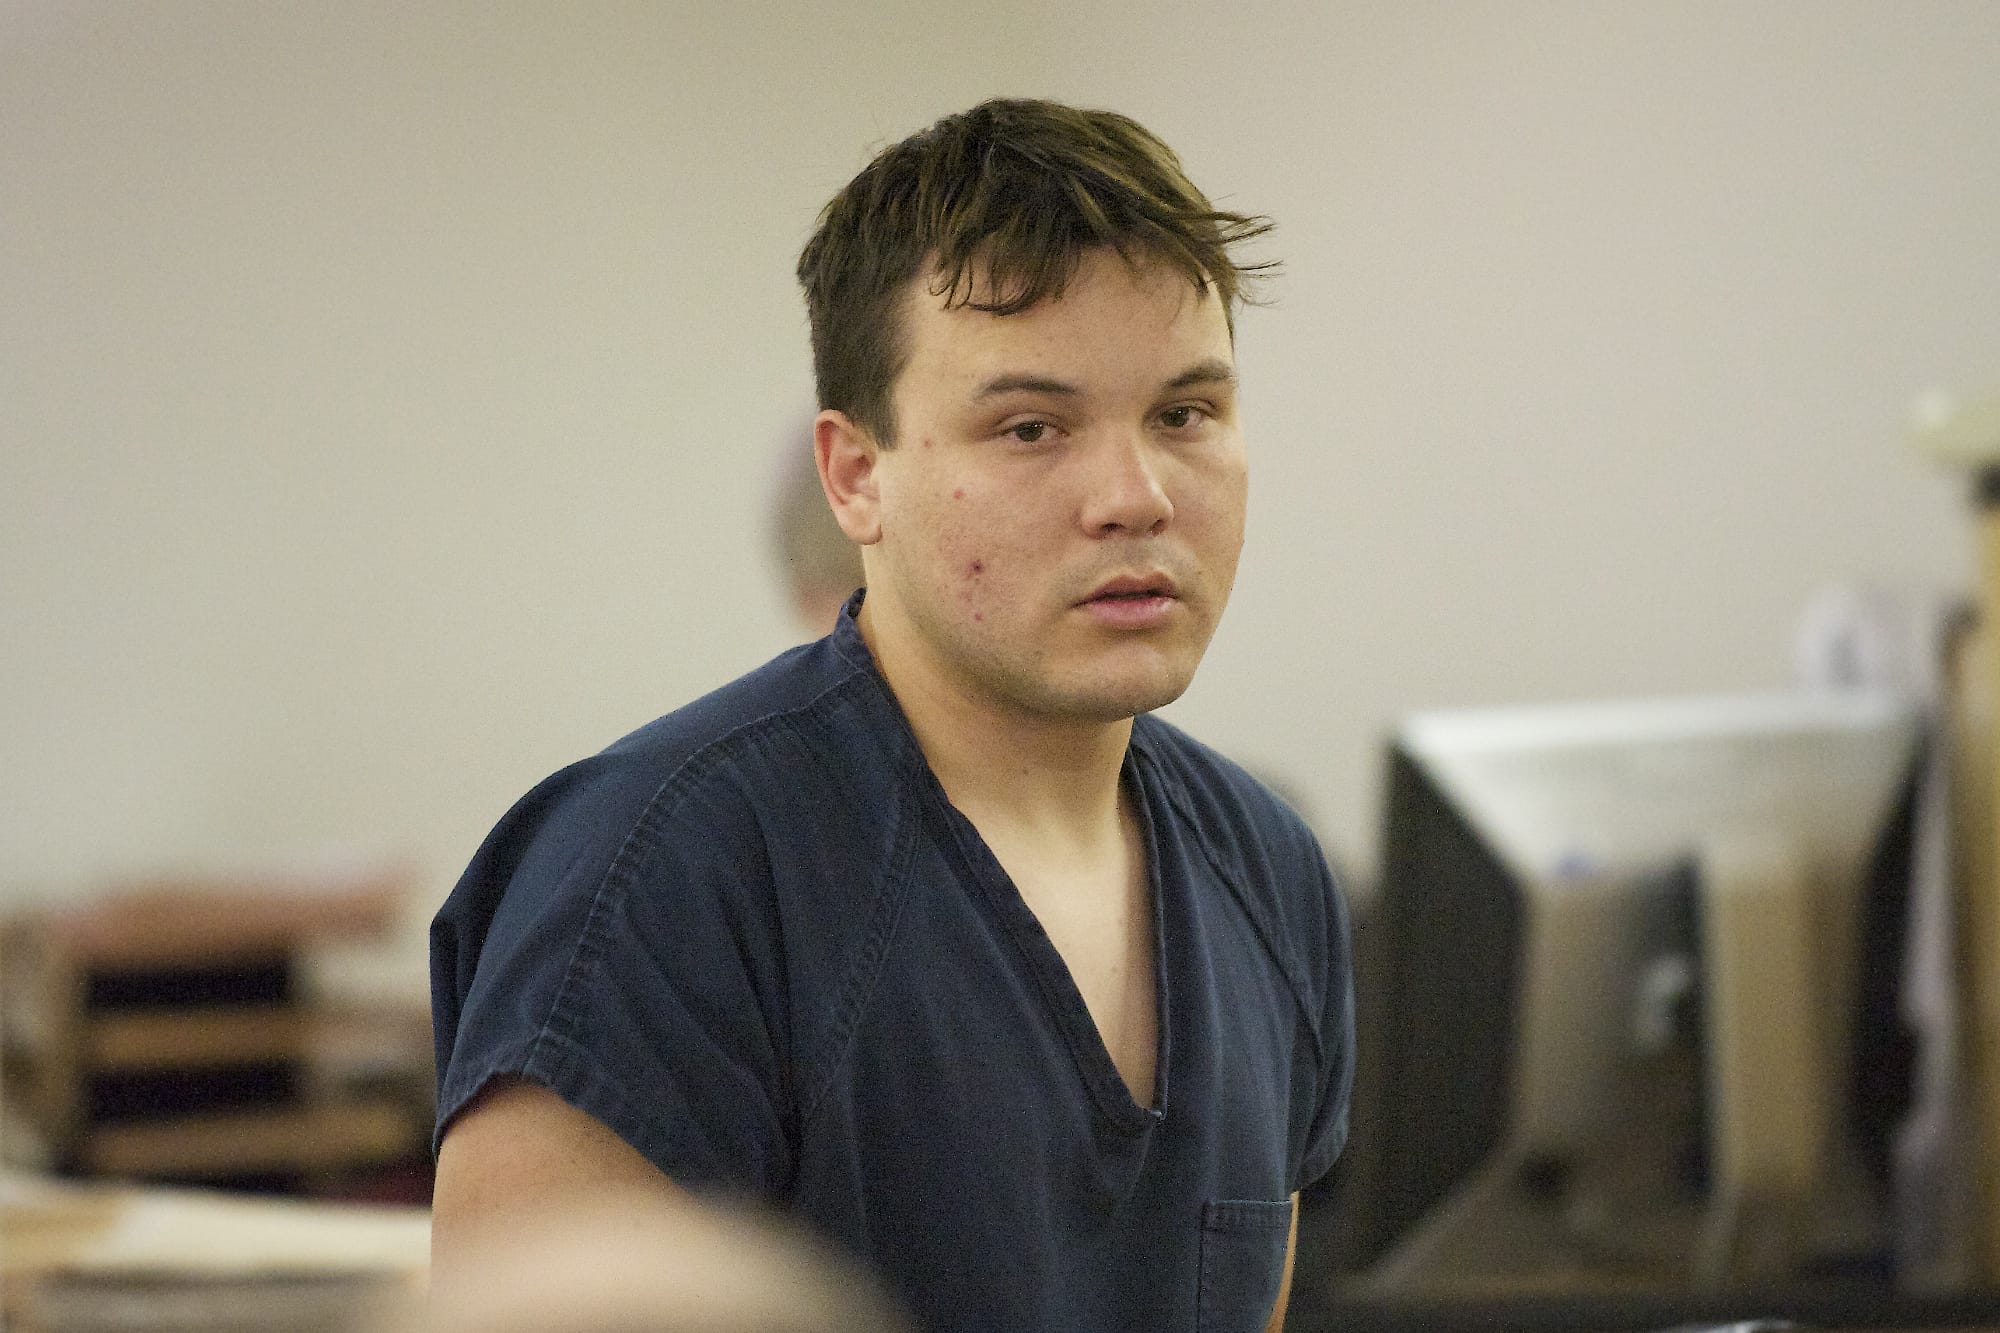 Keven Carlson-Aguilar, 26, appeared Tuesday in Clark County Superior Court on suspicion of attempted sexual exploitation of a minor and communication with a minor for immoral purposes.